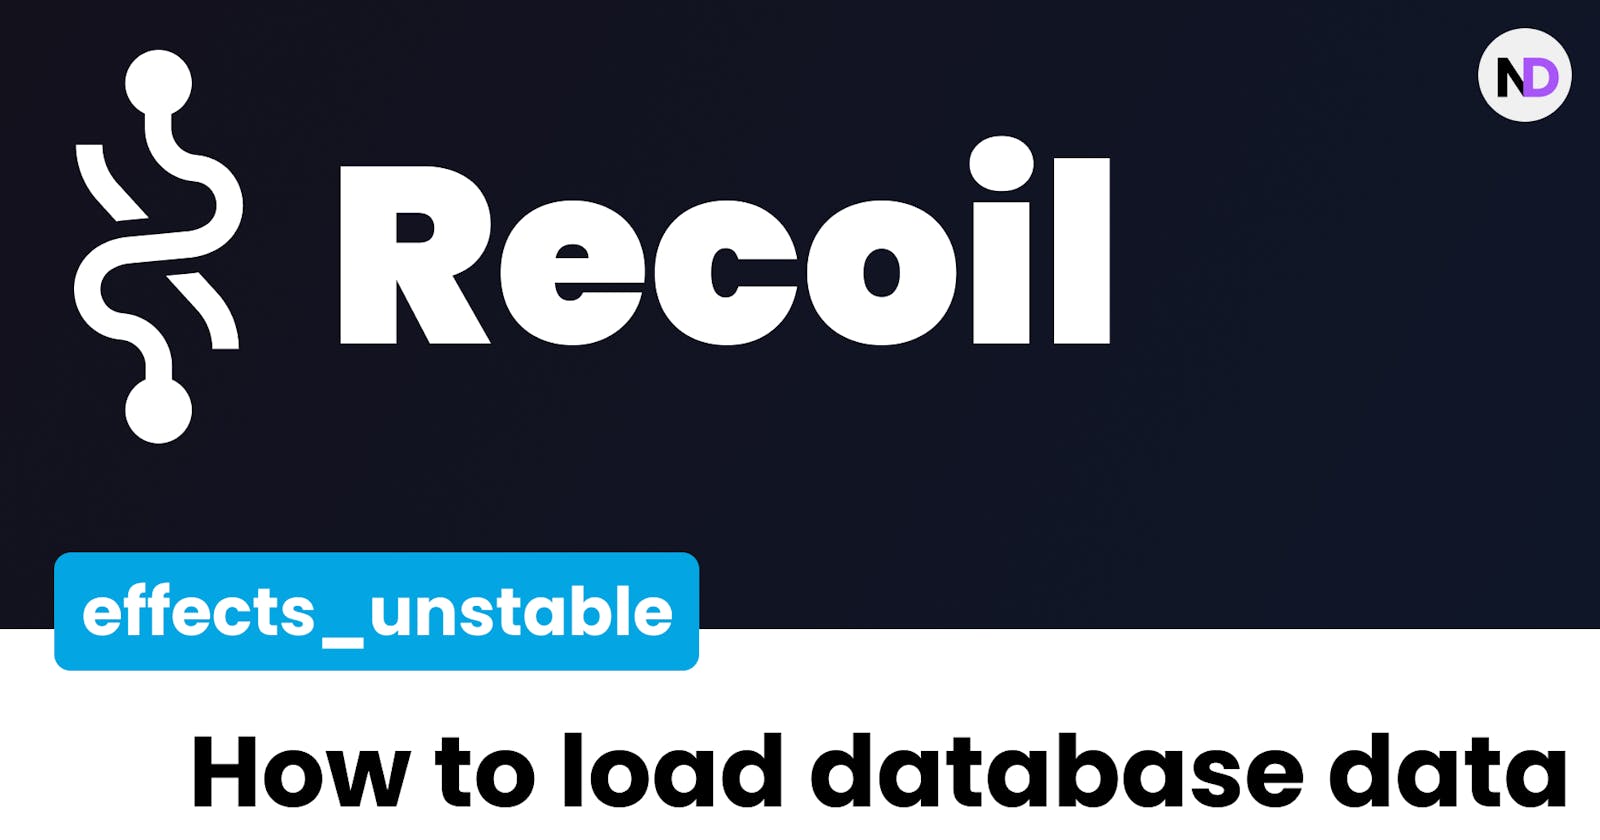 How to use recoil effects_unstable for loading data from API.